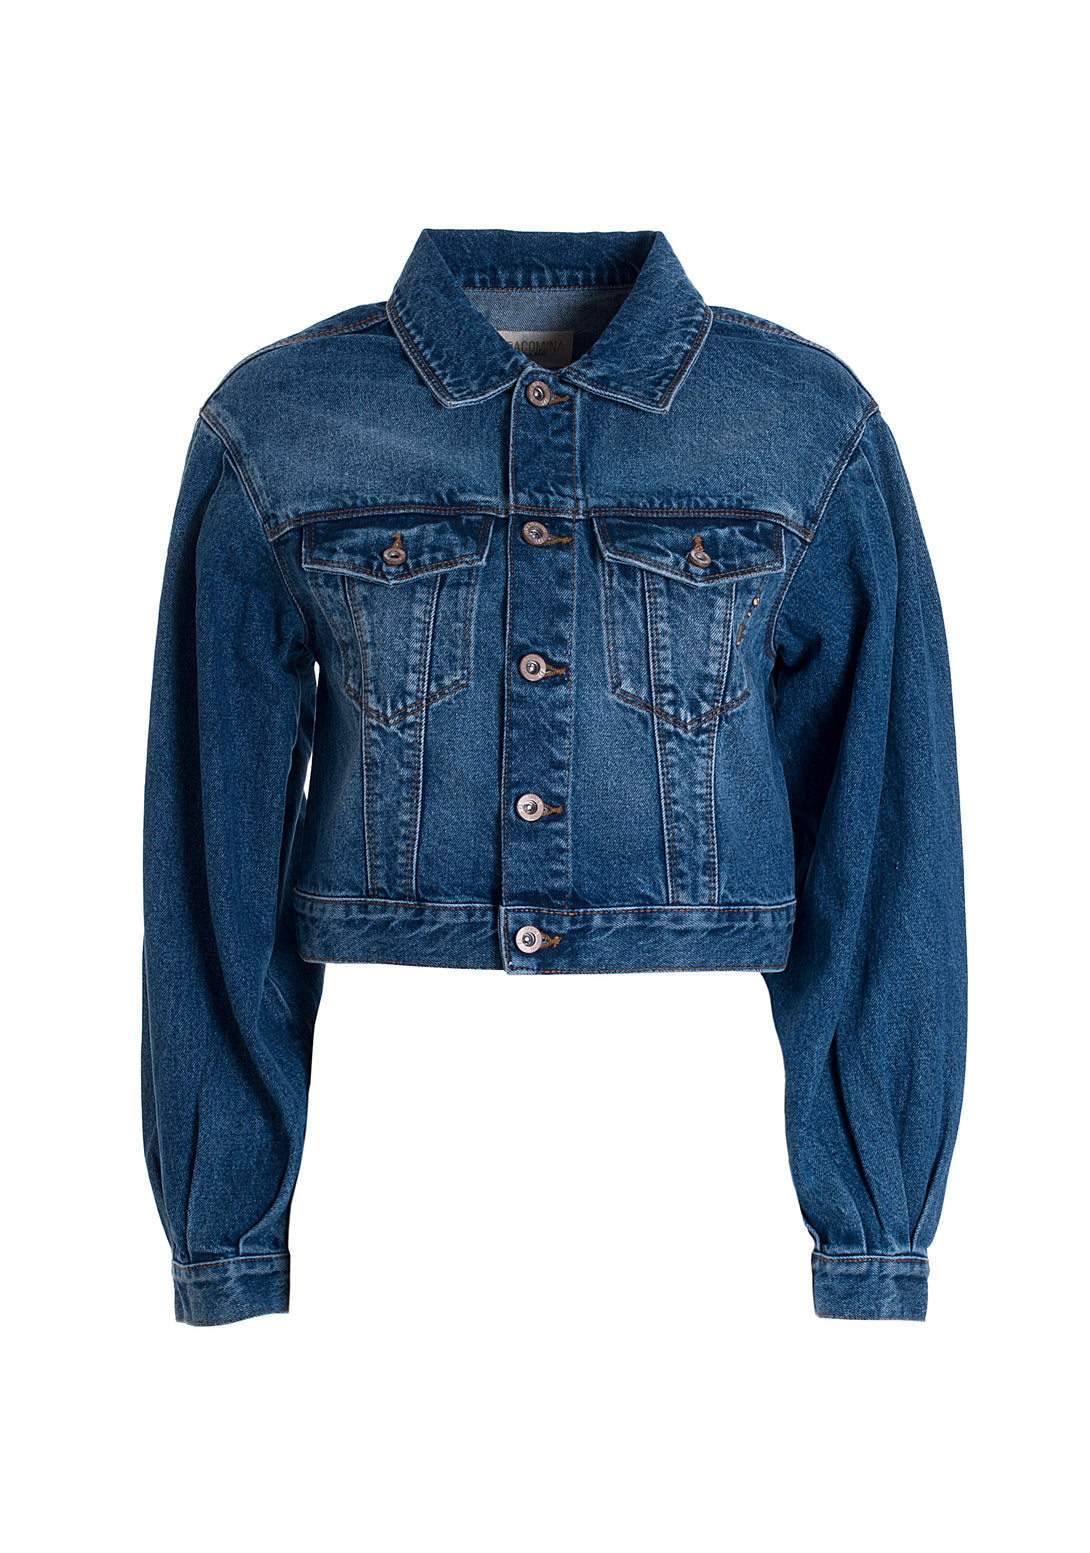 Jacket cropped made in denim with middle wash